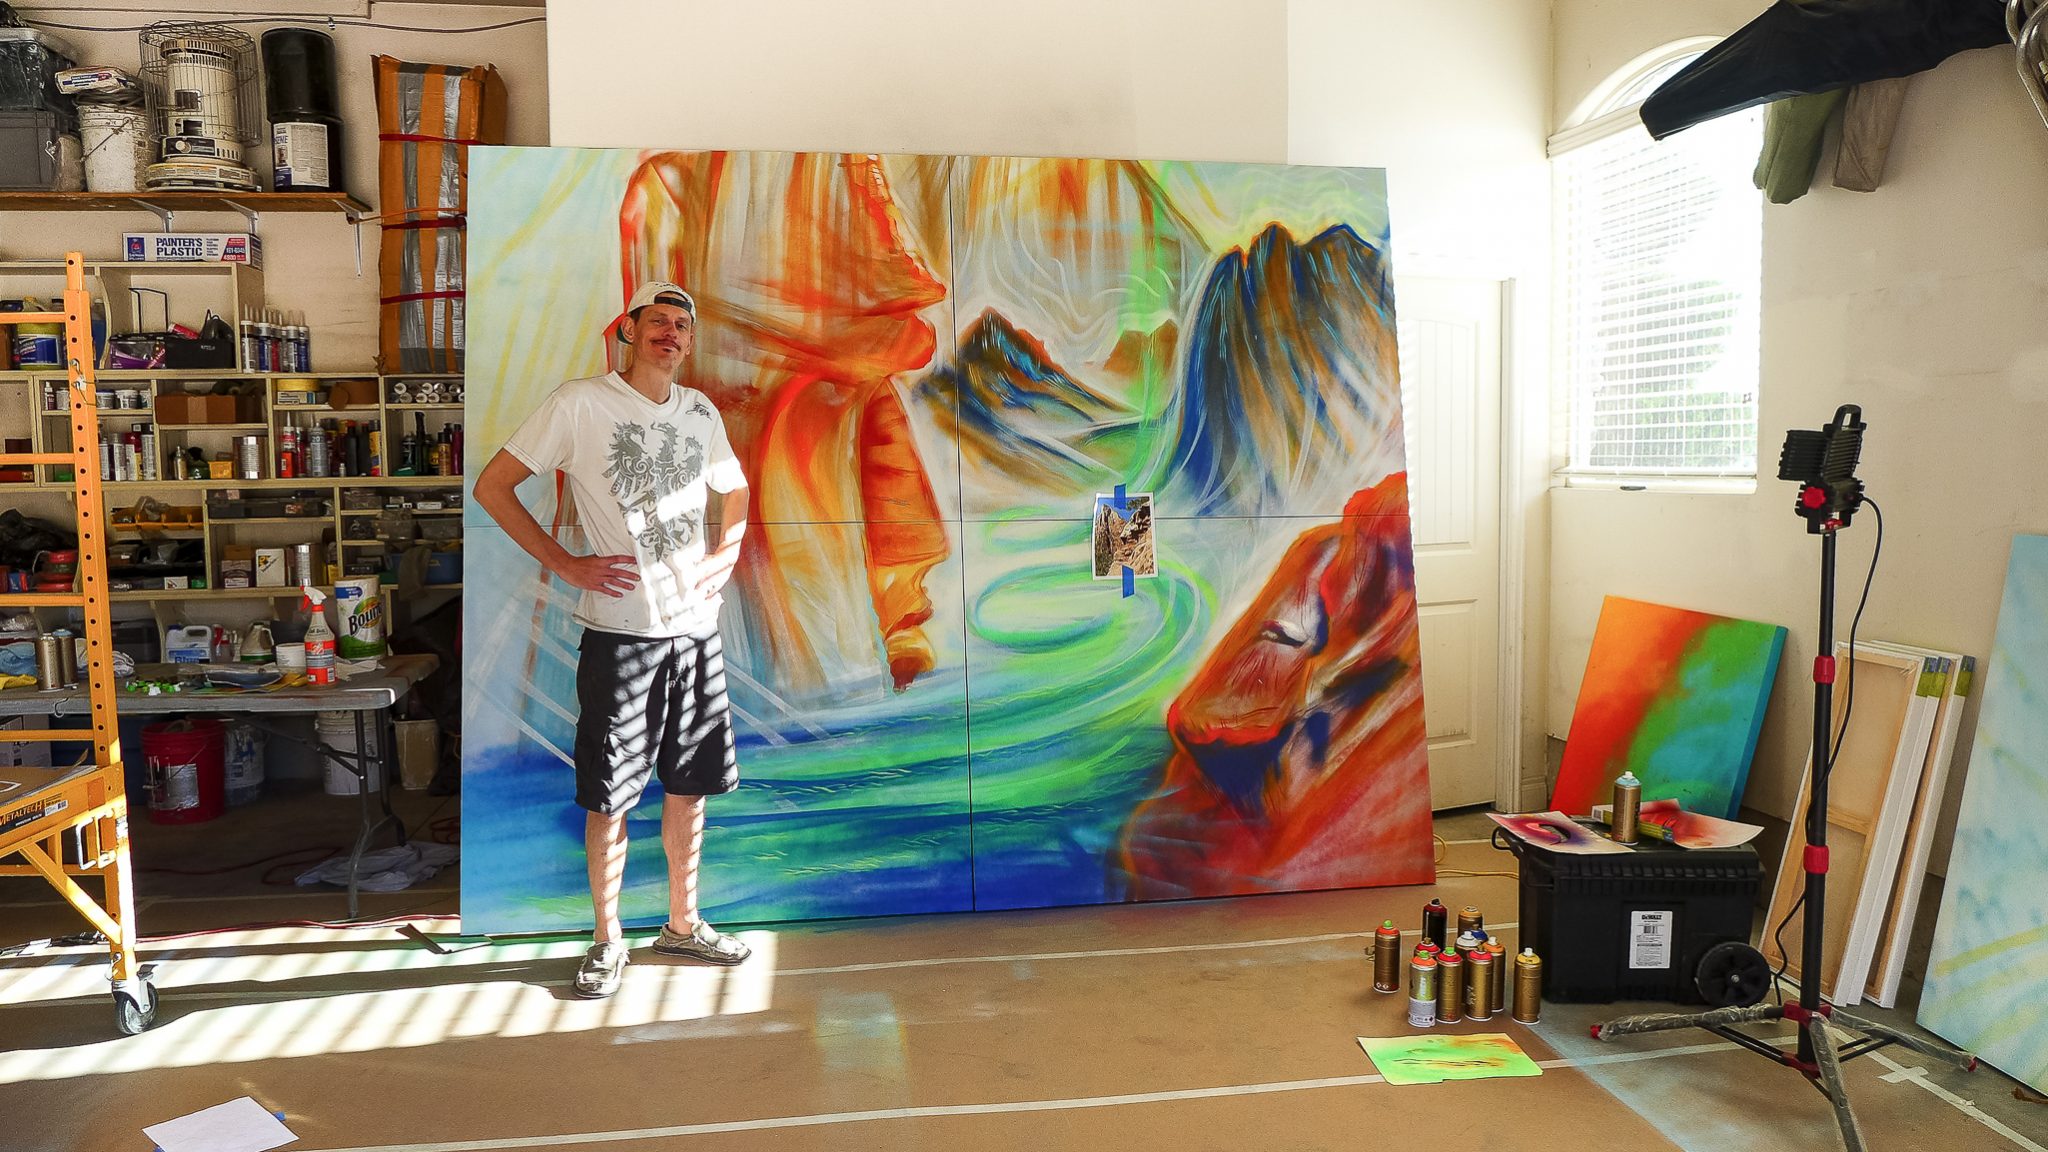 artist mike bowen in front of large painting